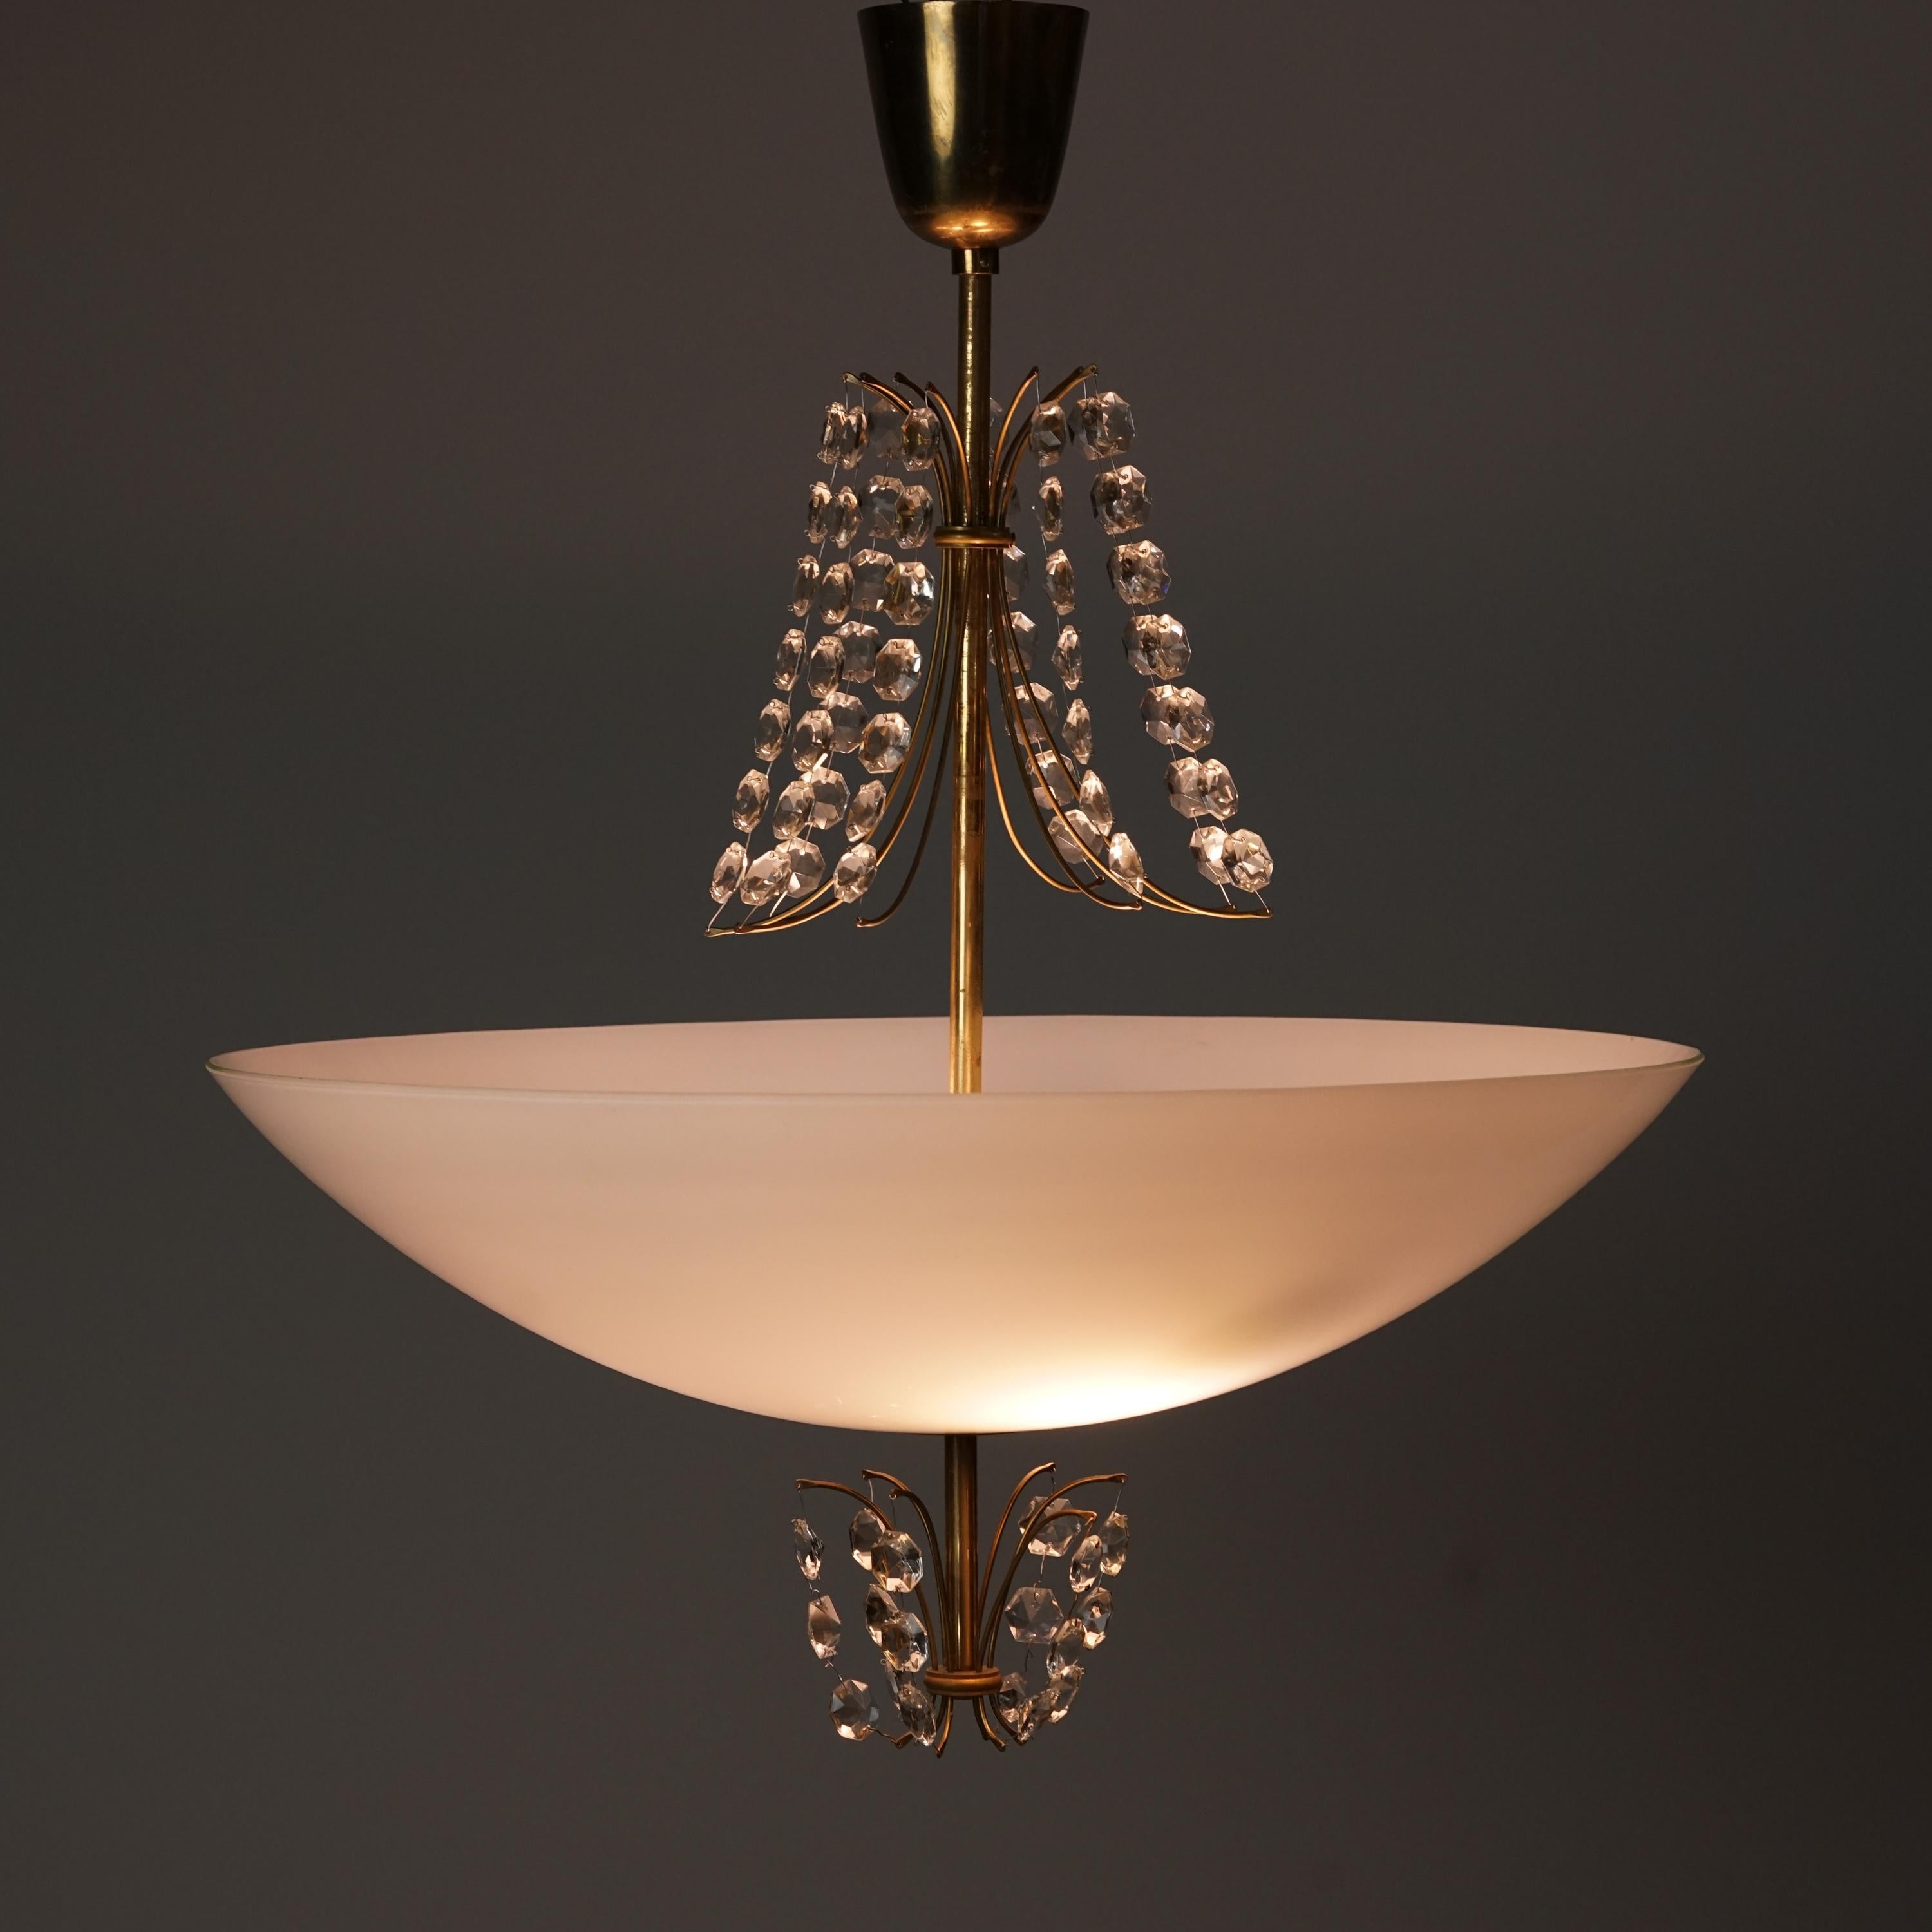 Mid-20th Century Lisa Johansson-Pape Chandelier, Orno Oy, 1940s/1950s For Sale